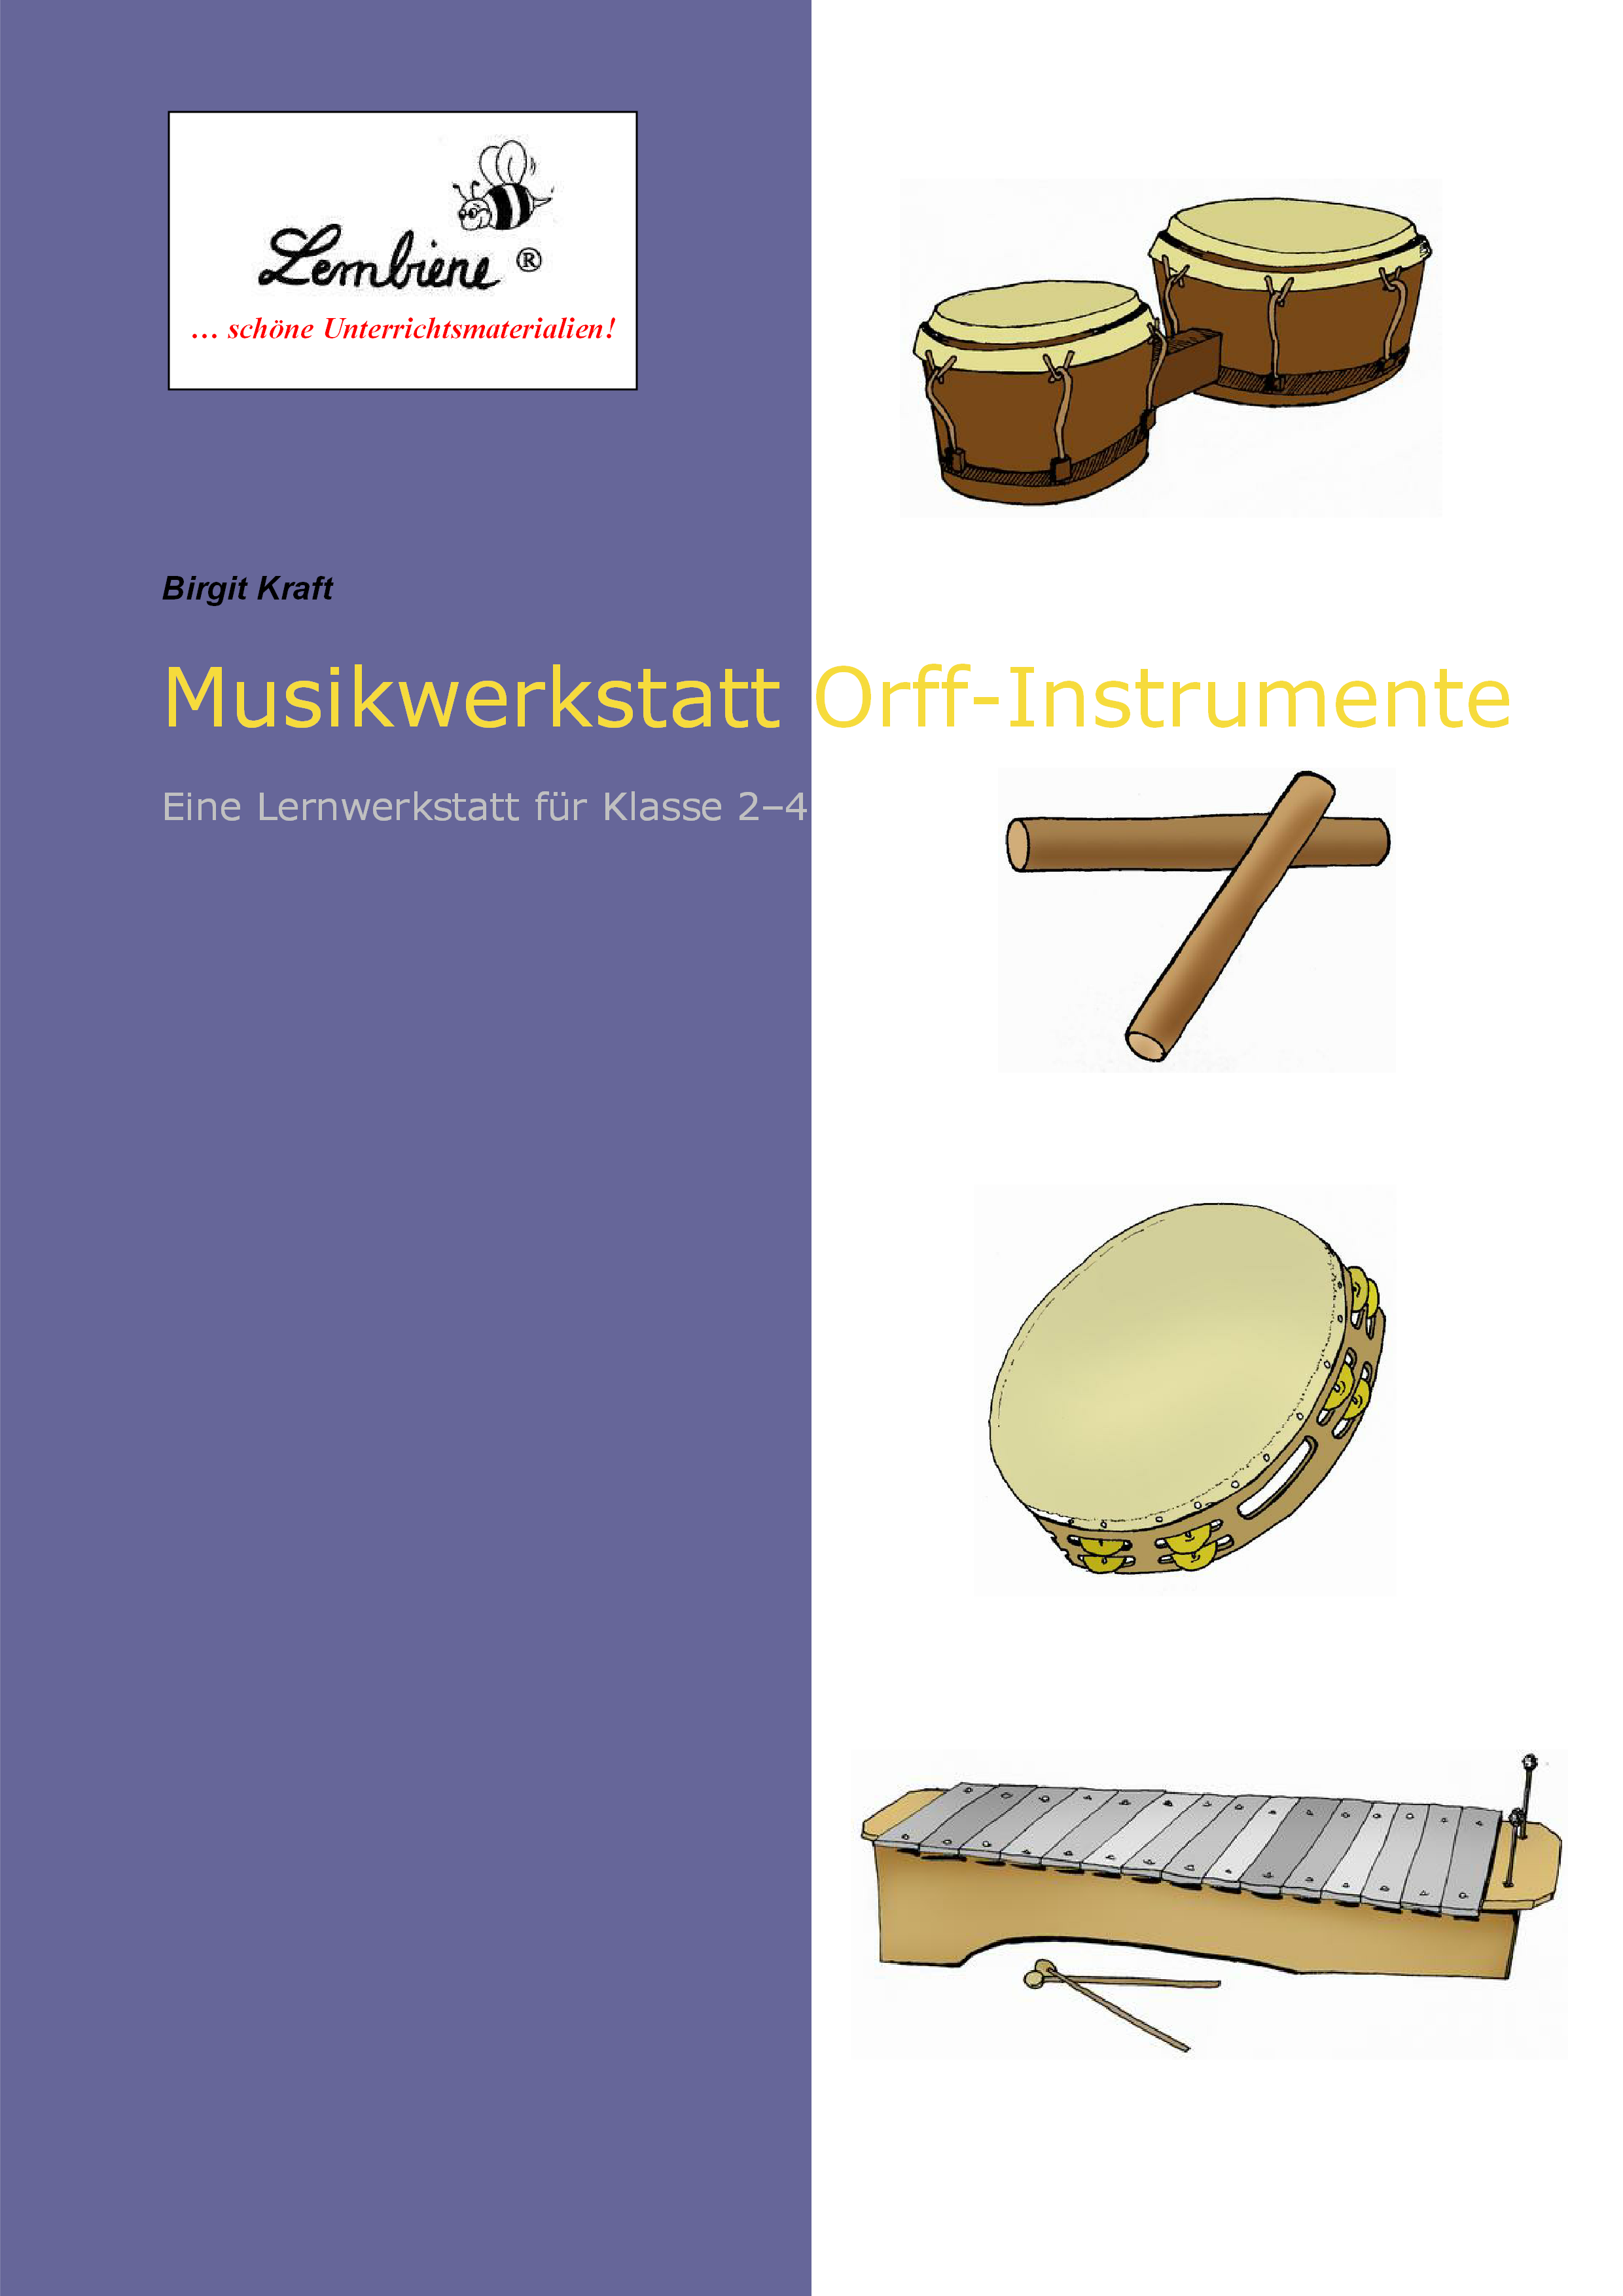 Die Orff-Instrumente | Orff activities, Art education lessons, Orff